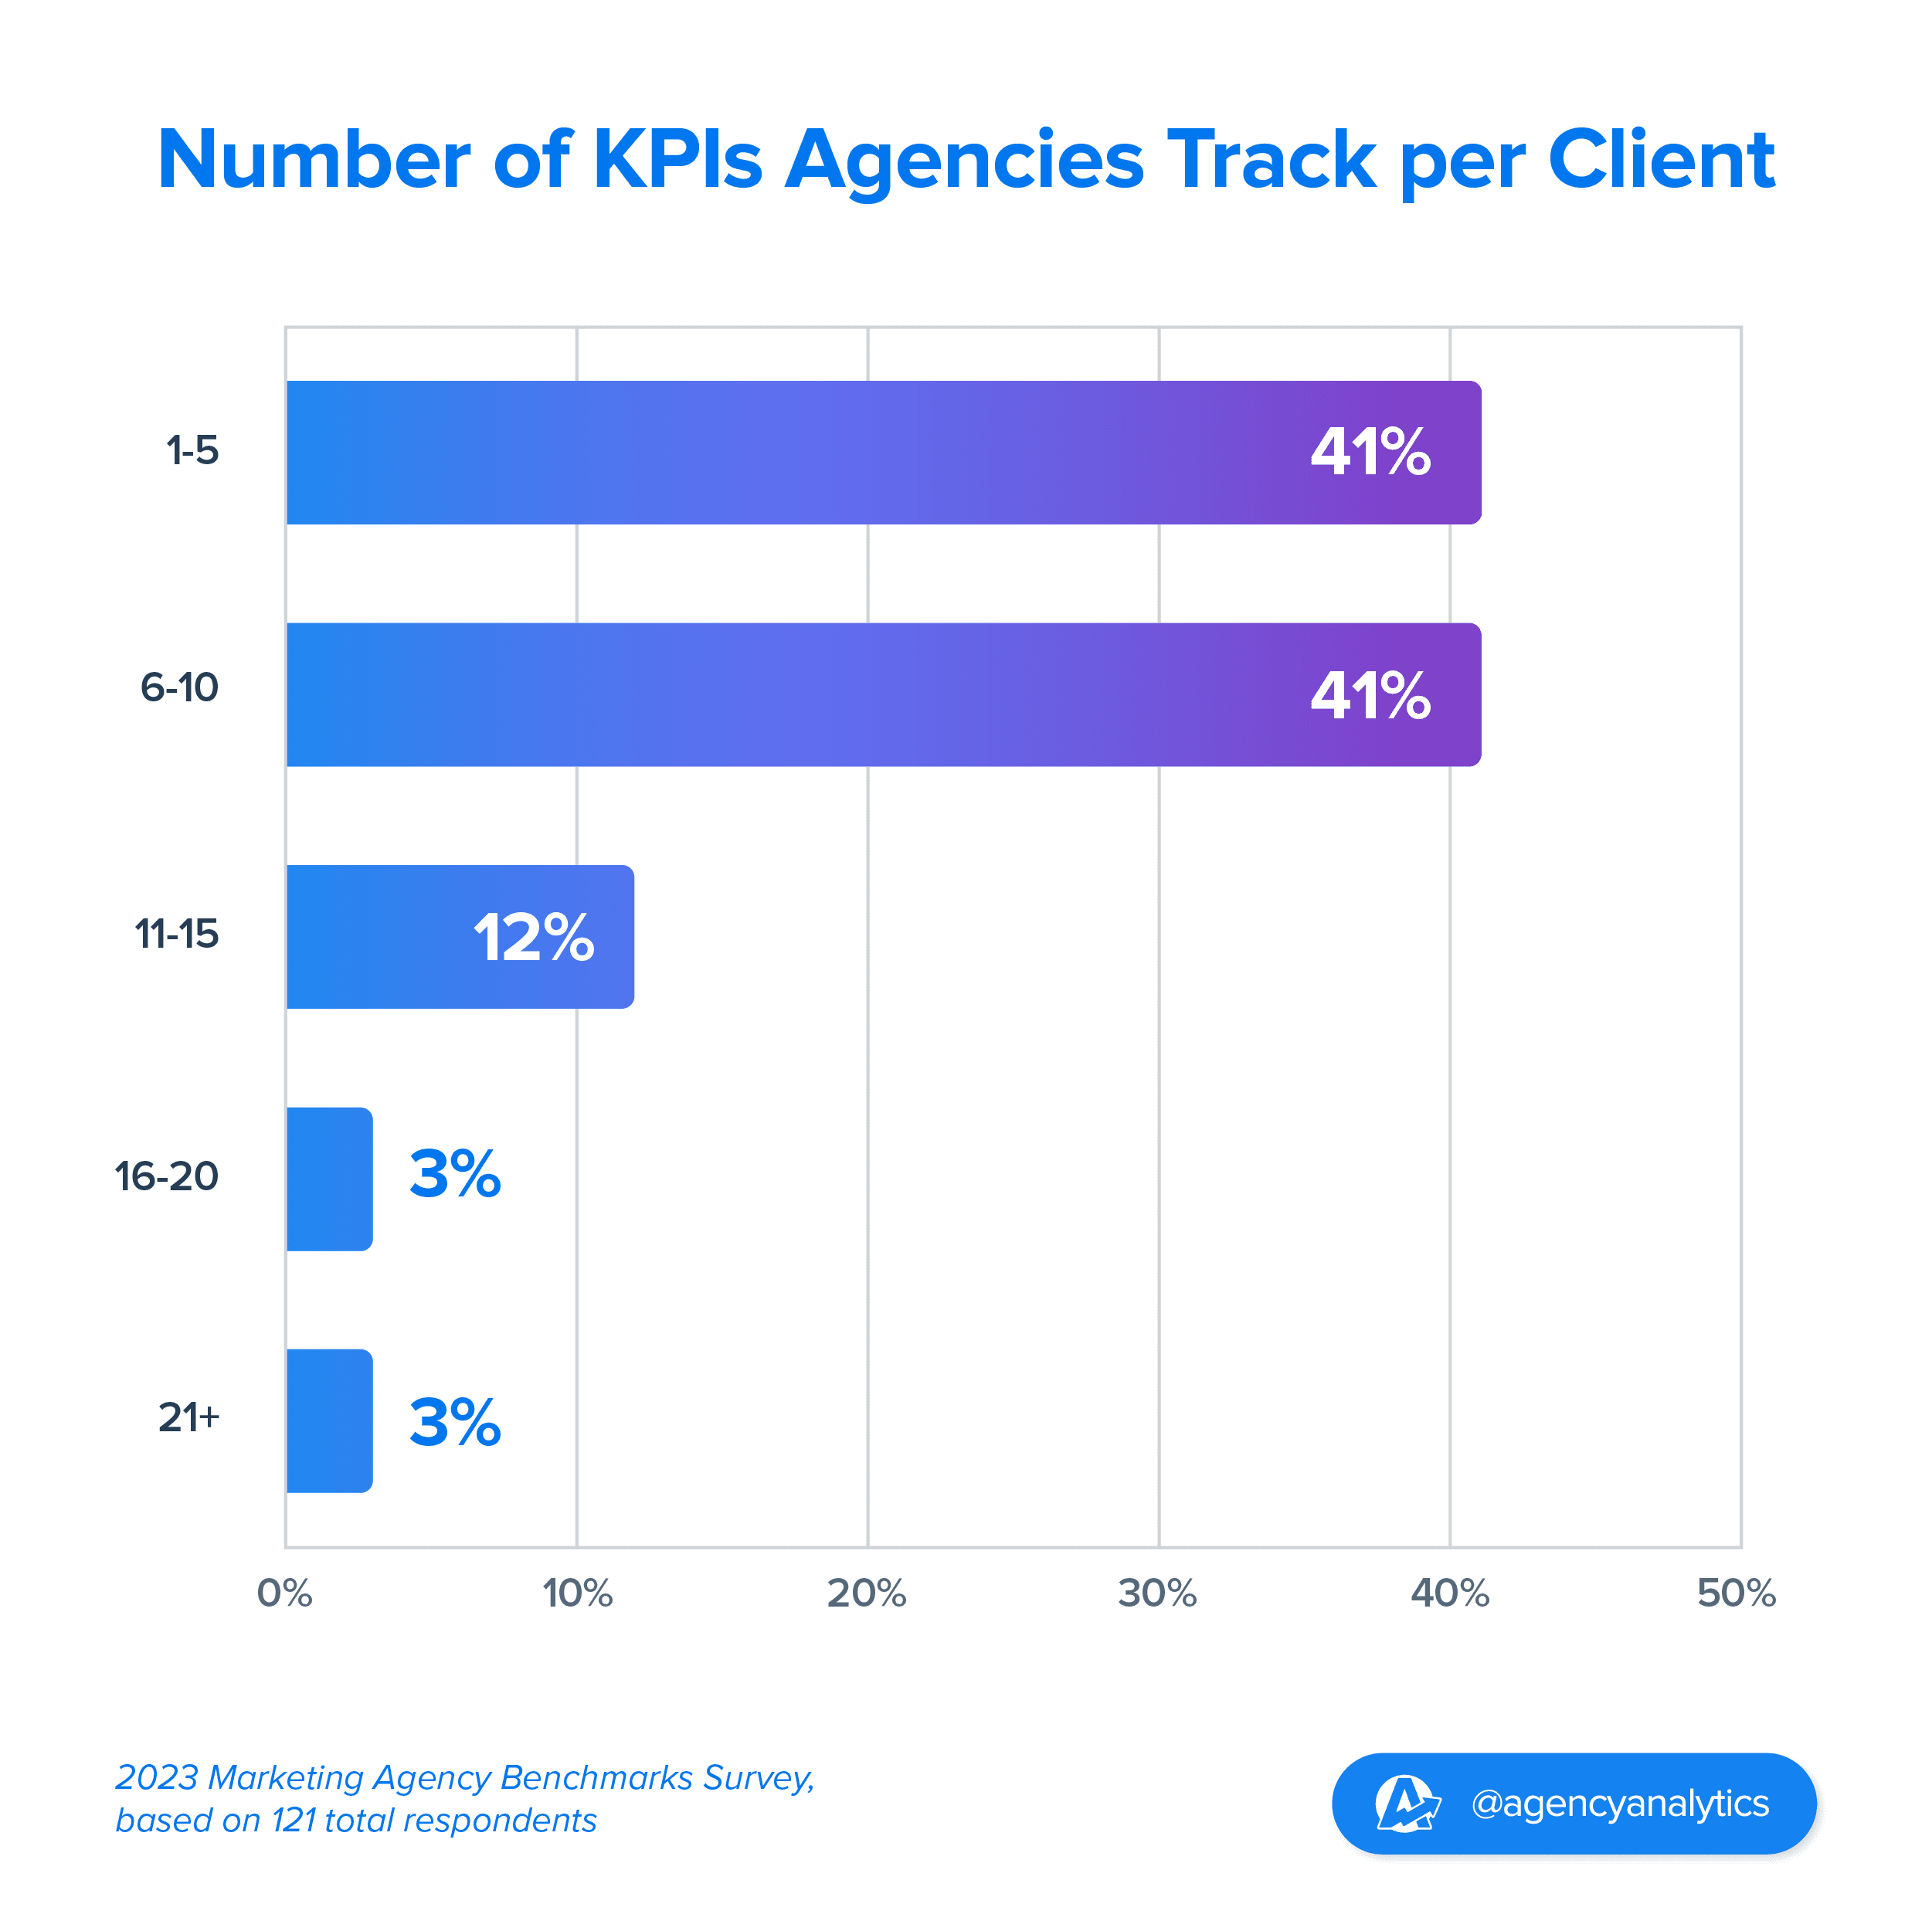 Number of KPIs marketing agencies track per client